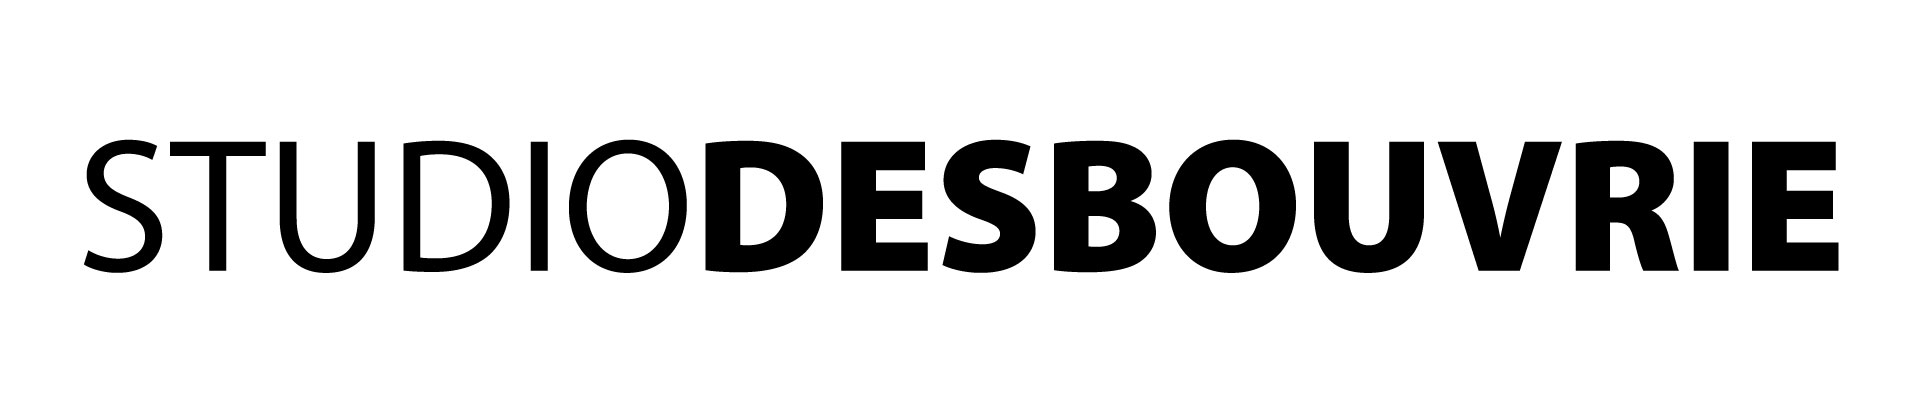 StudiodesBouvrie-logo-text-only-1920px